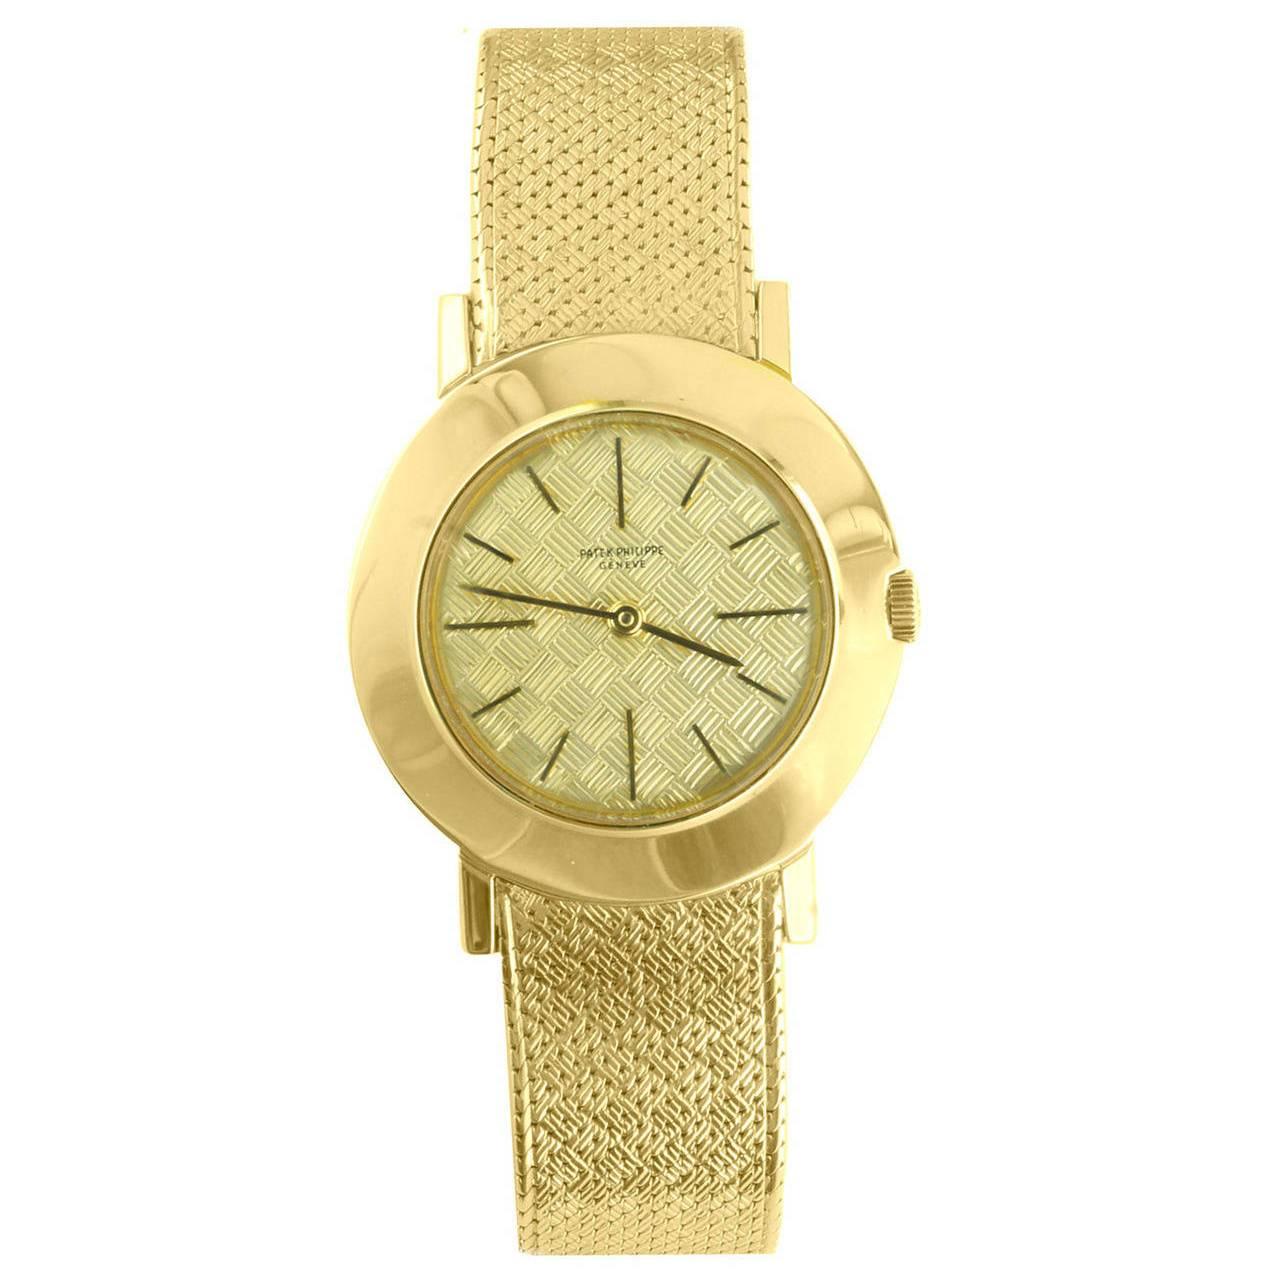 Patek Philippe Yellow Gold Patterned Dial Wristwatch Ref 2594 For Sale